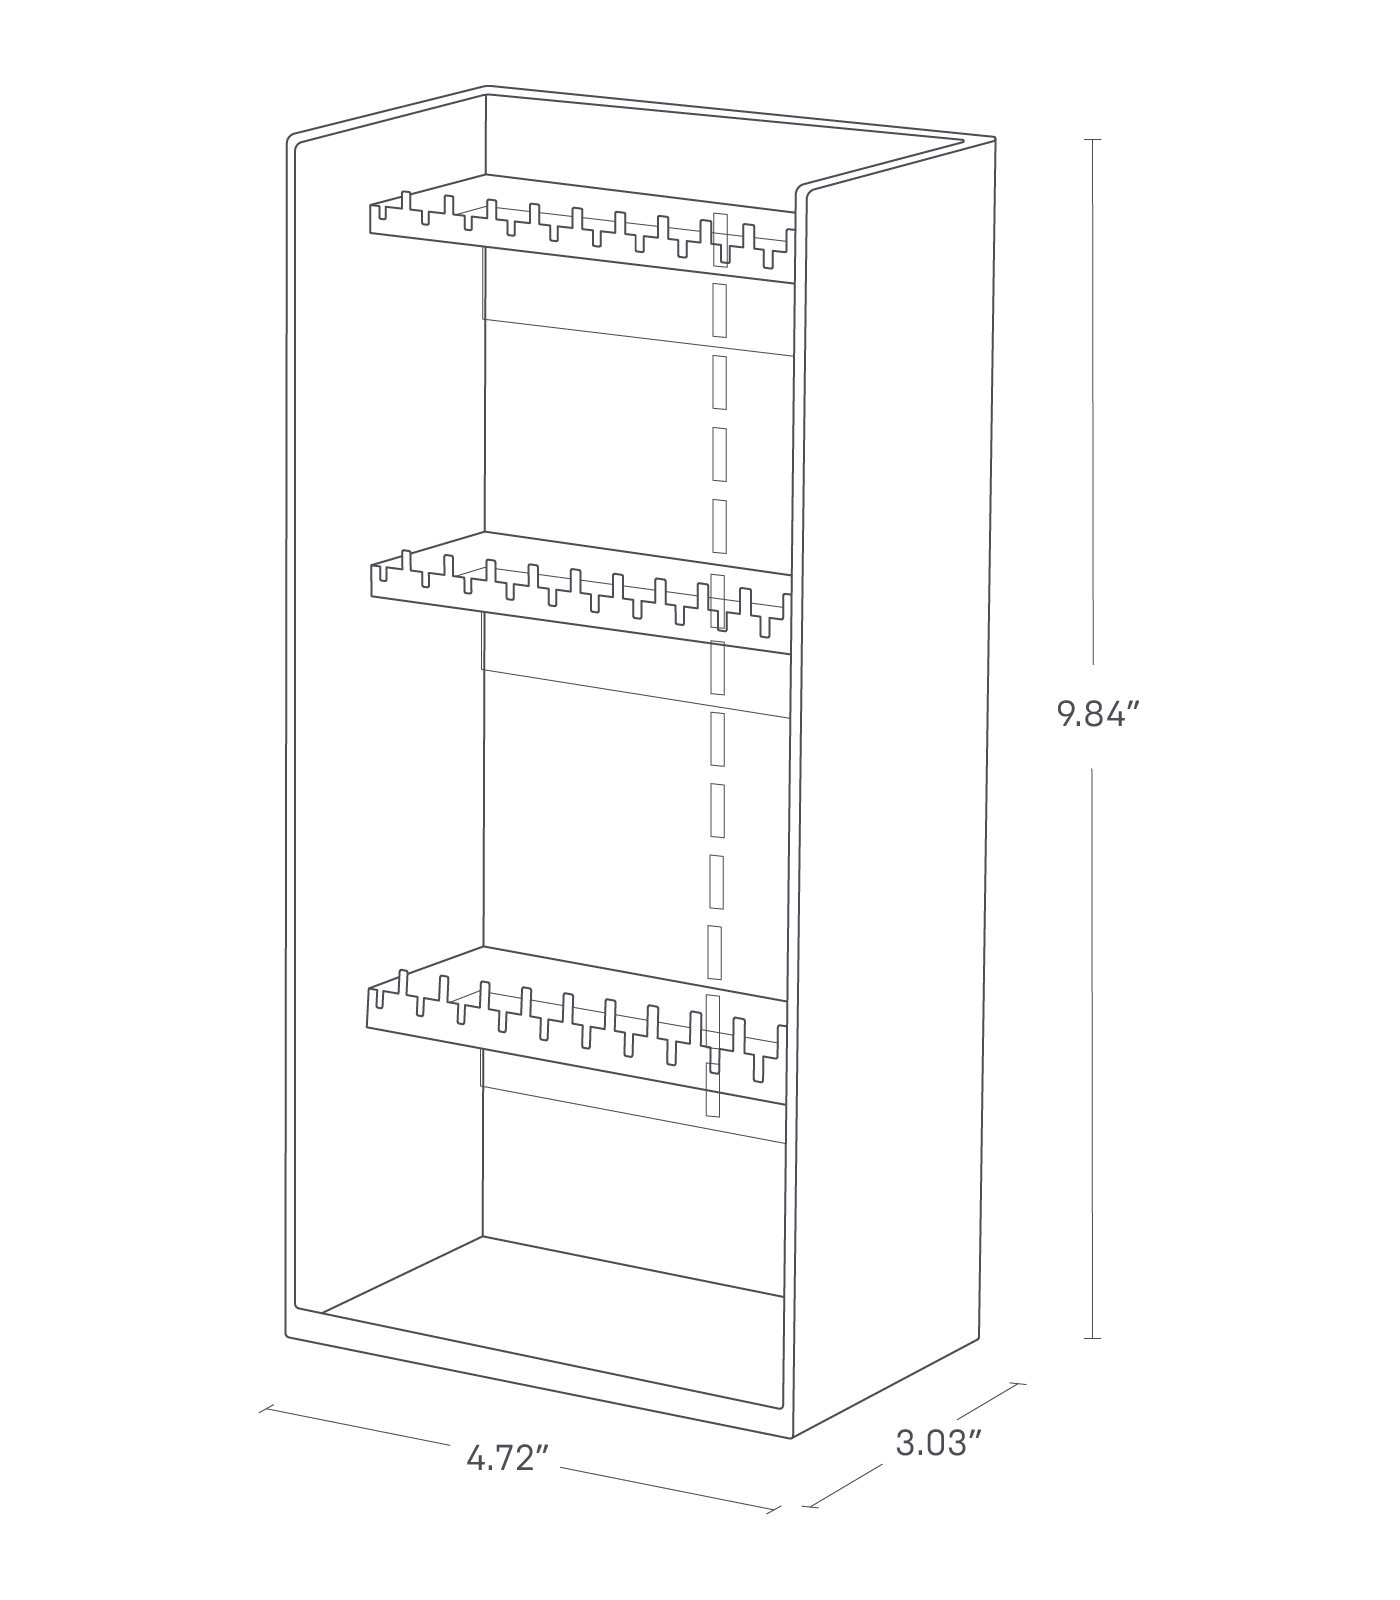 Dimension image for Jewelry Organizer showing a length of 4.72